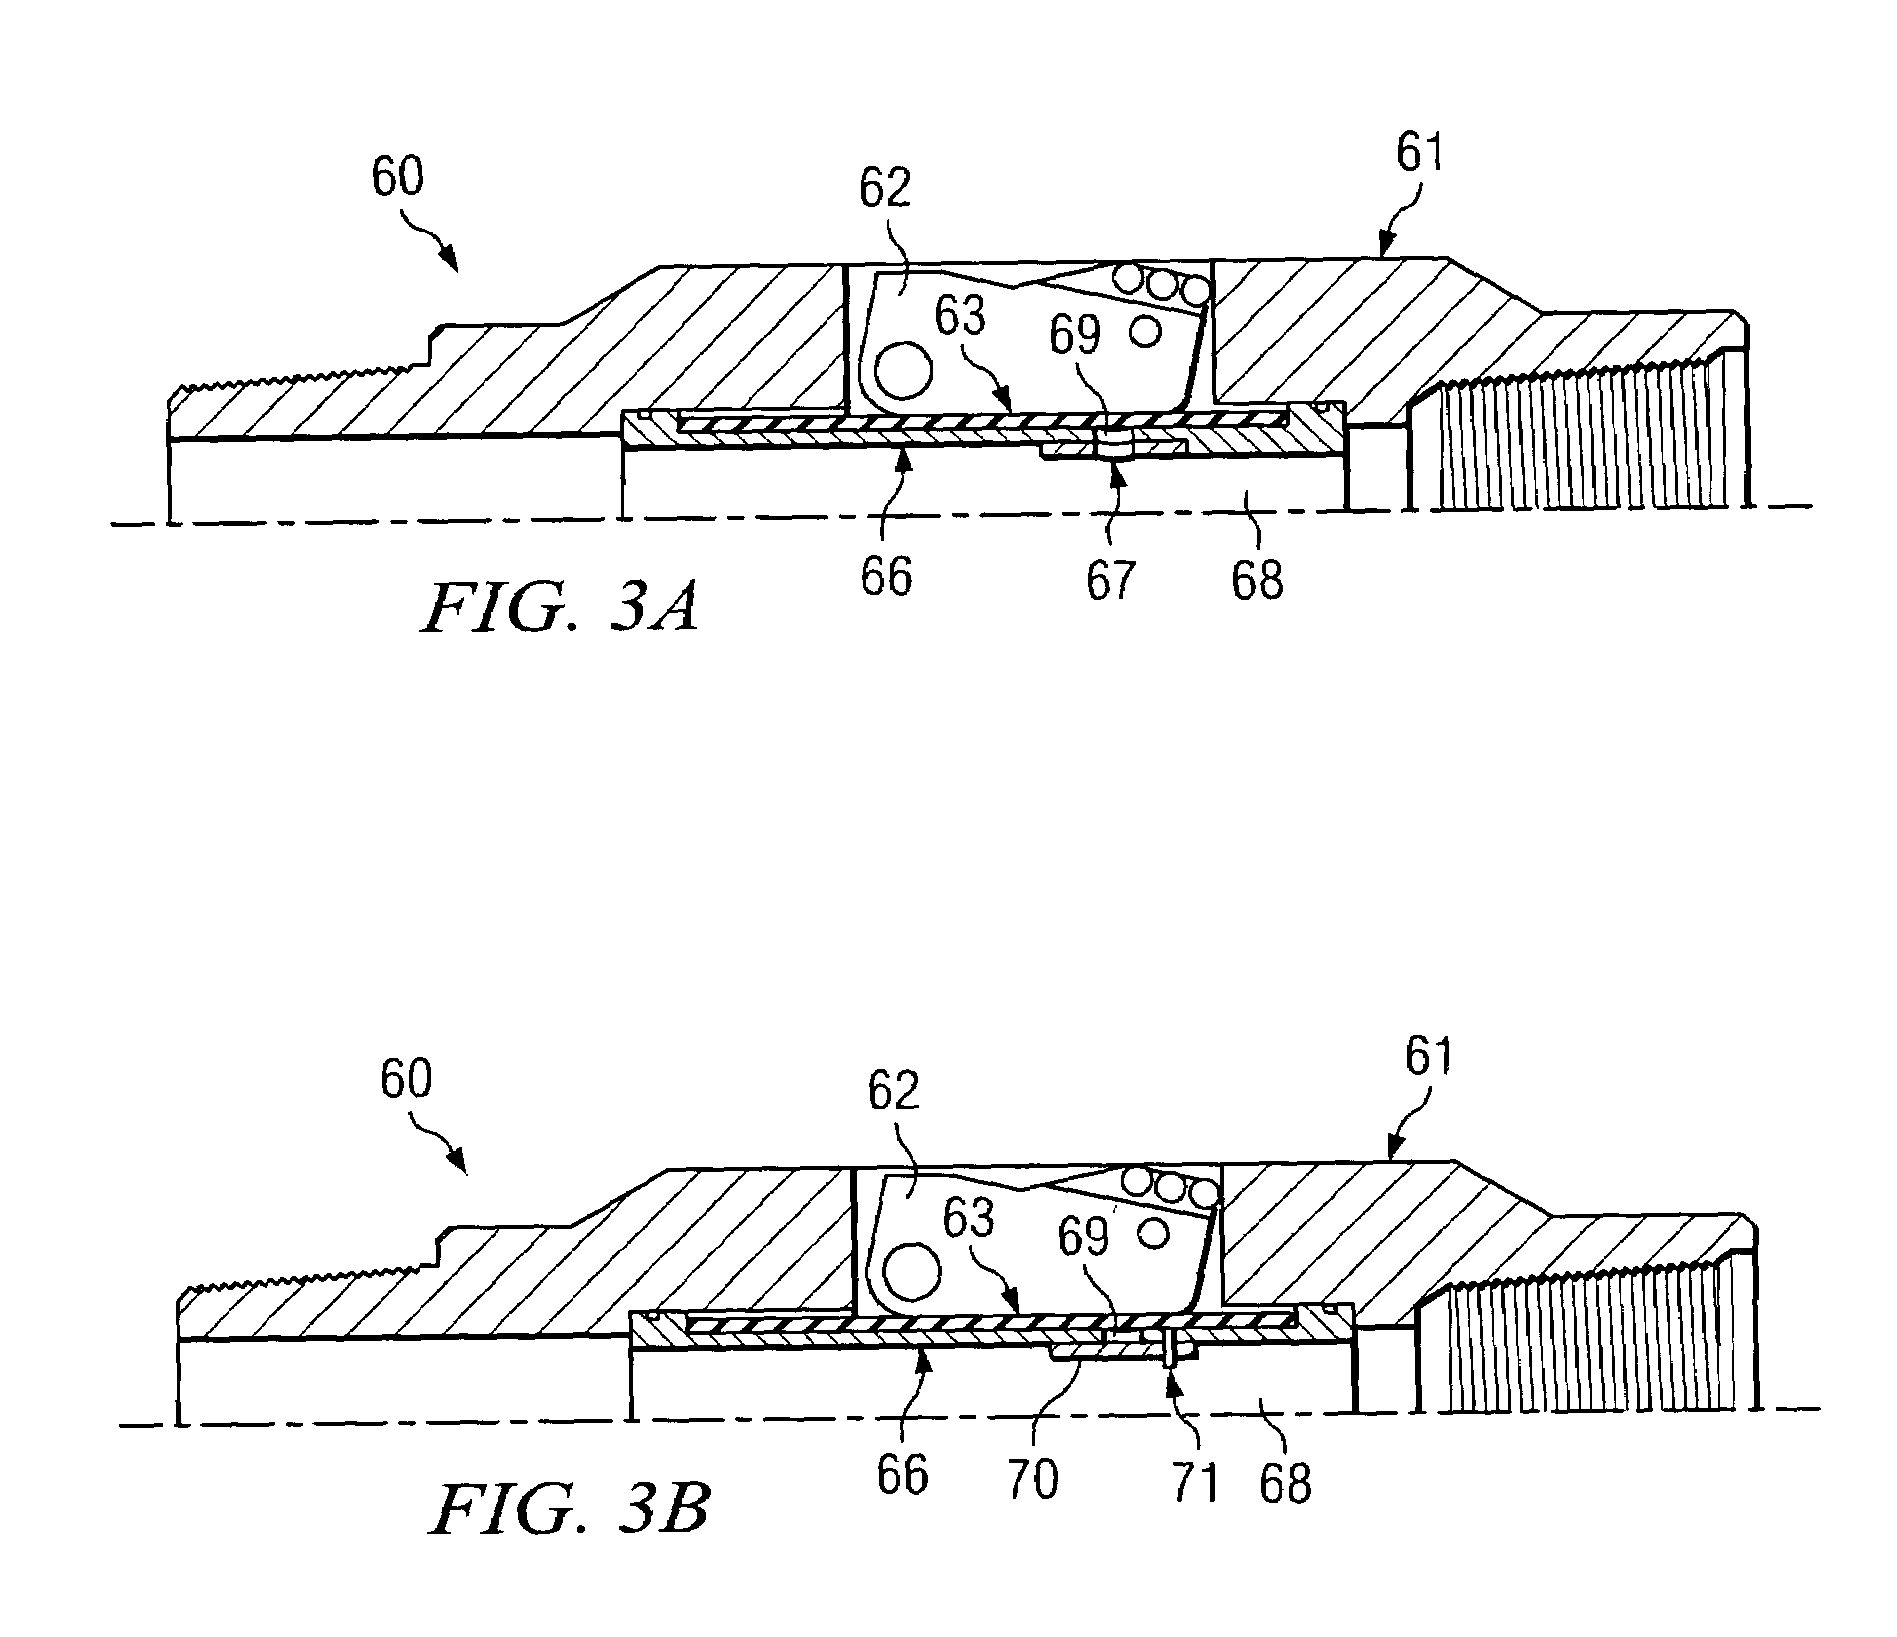 Drilling tool having an expandable bladder and method for using same